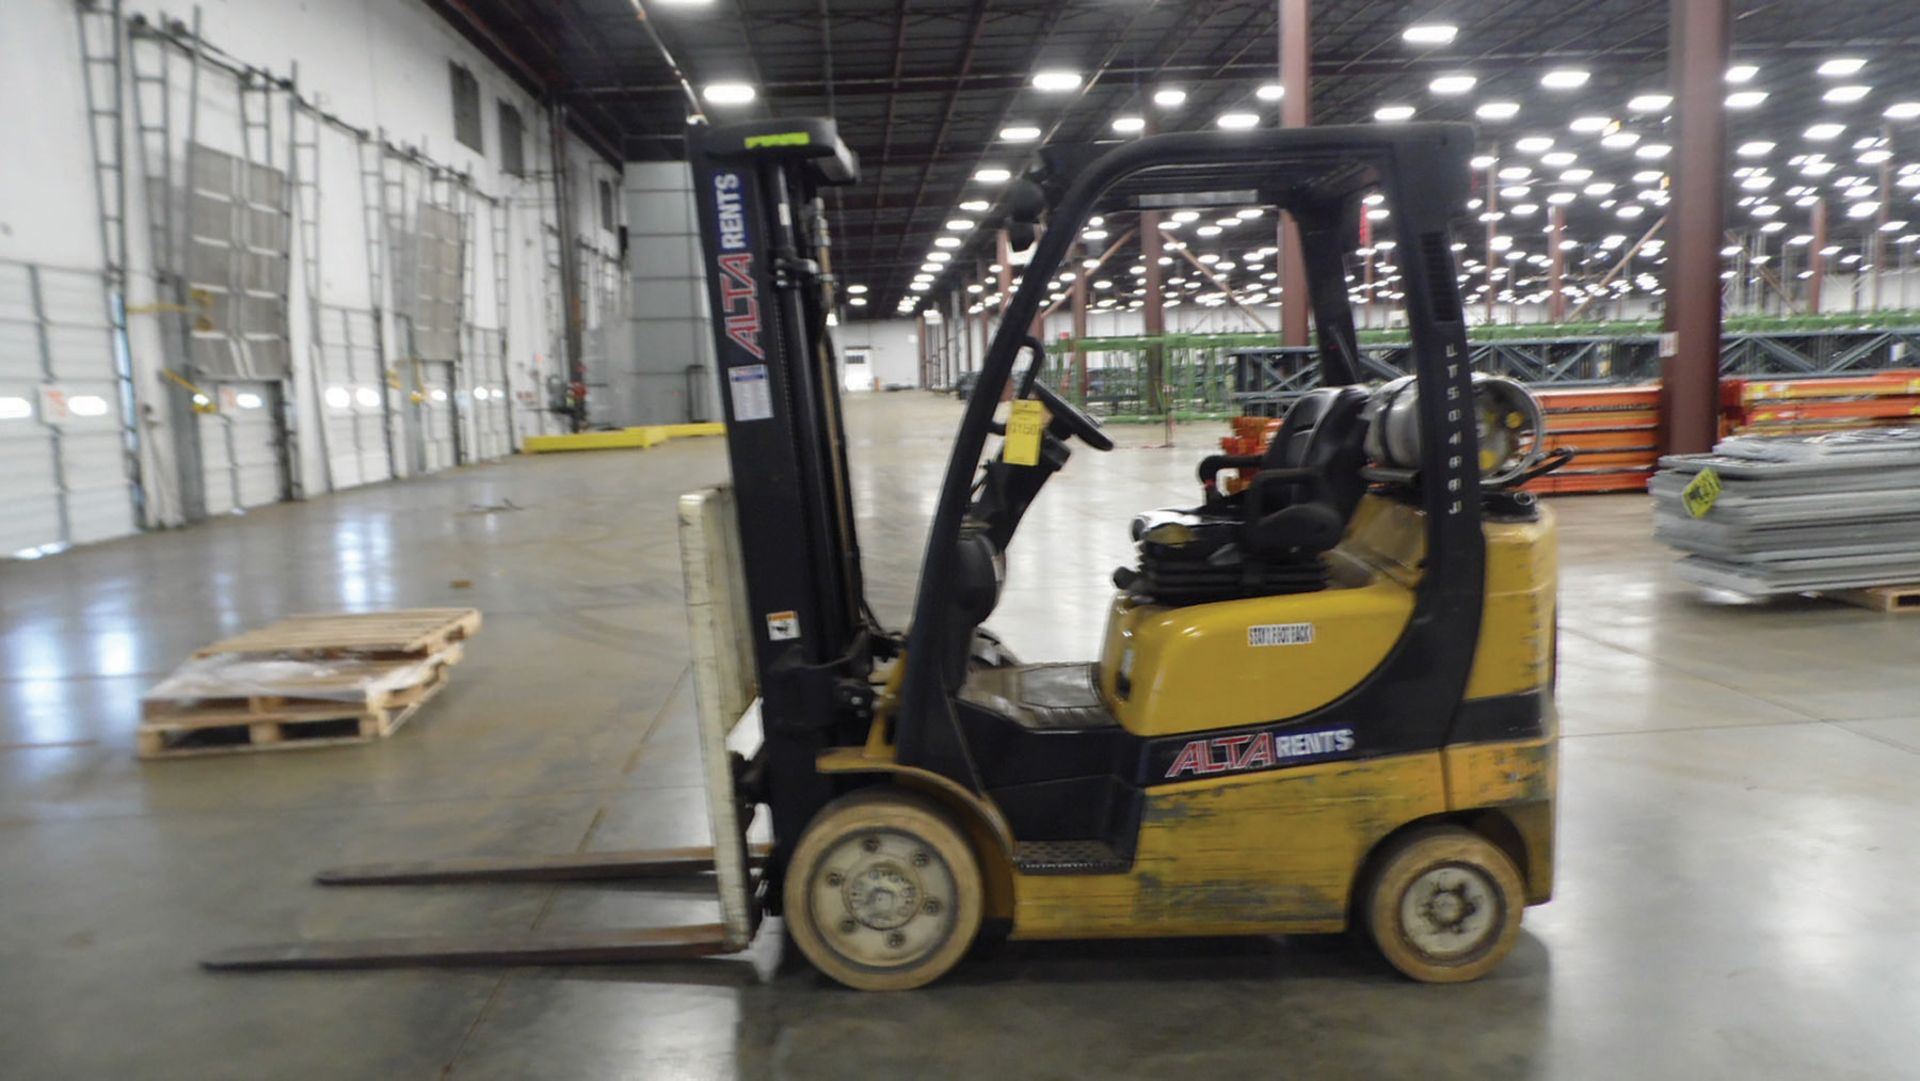 2011 YALE 5,000 LB. CAPACITY FORKLIFT; MODEL GLX050VXNVRE088, SOLID NON-MARKING TIRES, 3-STAGE MAST,